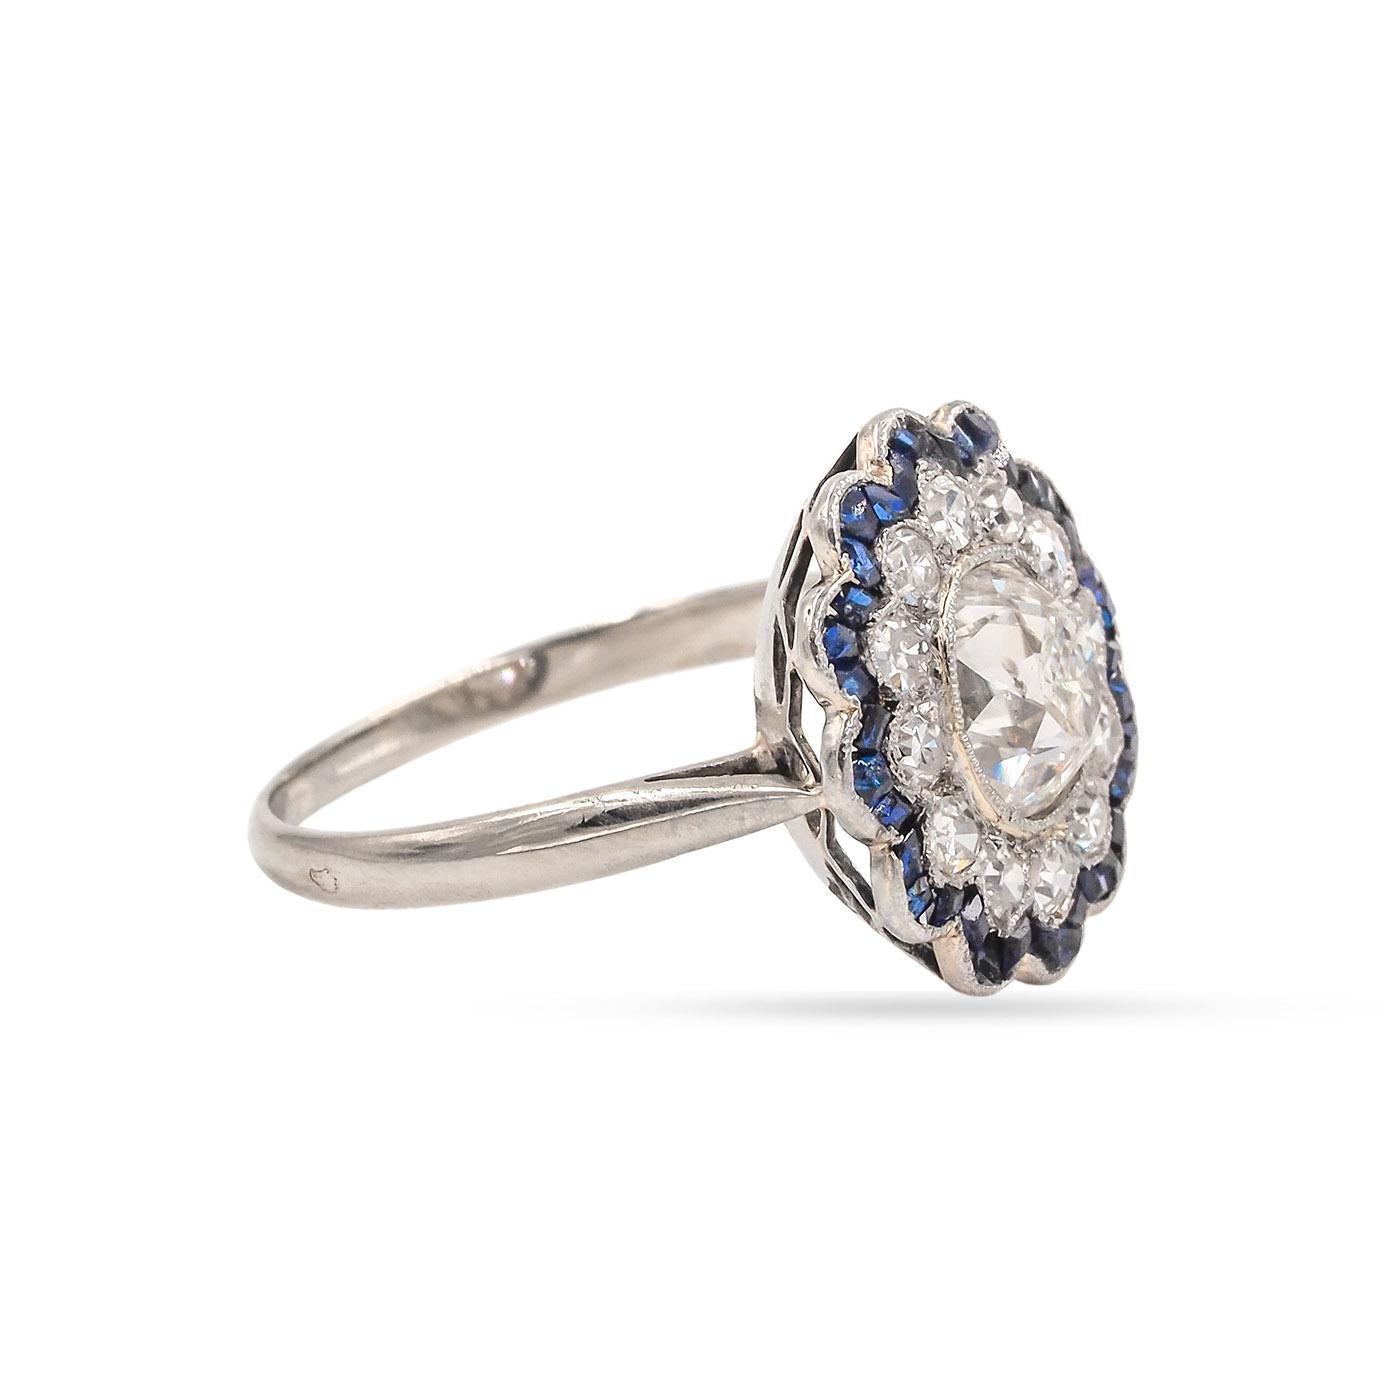 Edwardian era 1.39 Carat Old Mine Cut Diamond and Blue Sapphire Cluster Engagement Ring composed of 18k white gold. The center stone Old Mine Cushion Cut is GIA certified J color & SI1 clarity. Surrounded by a halo of 12 Single Cut diamonds weighing